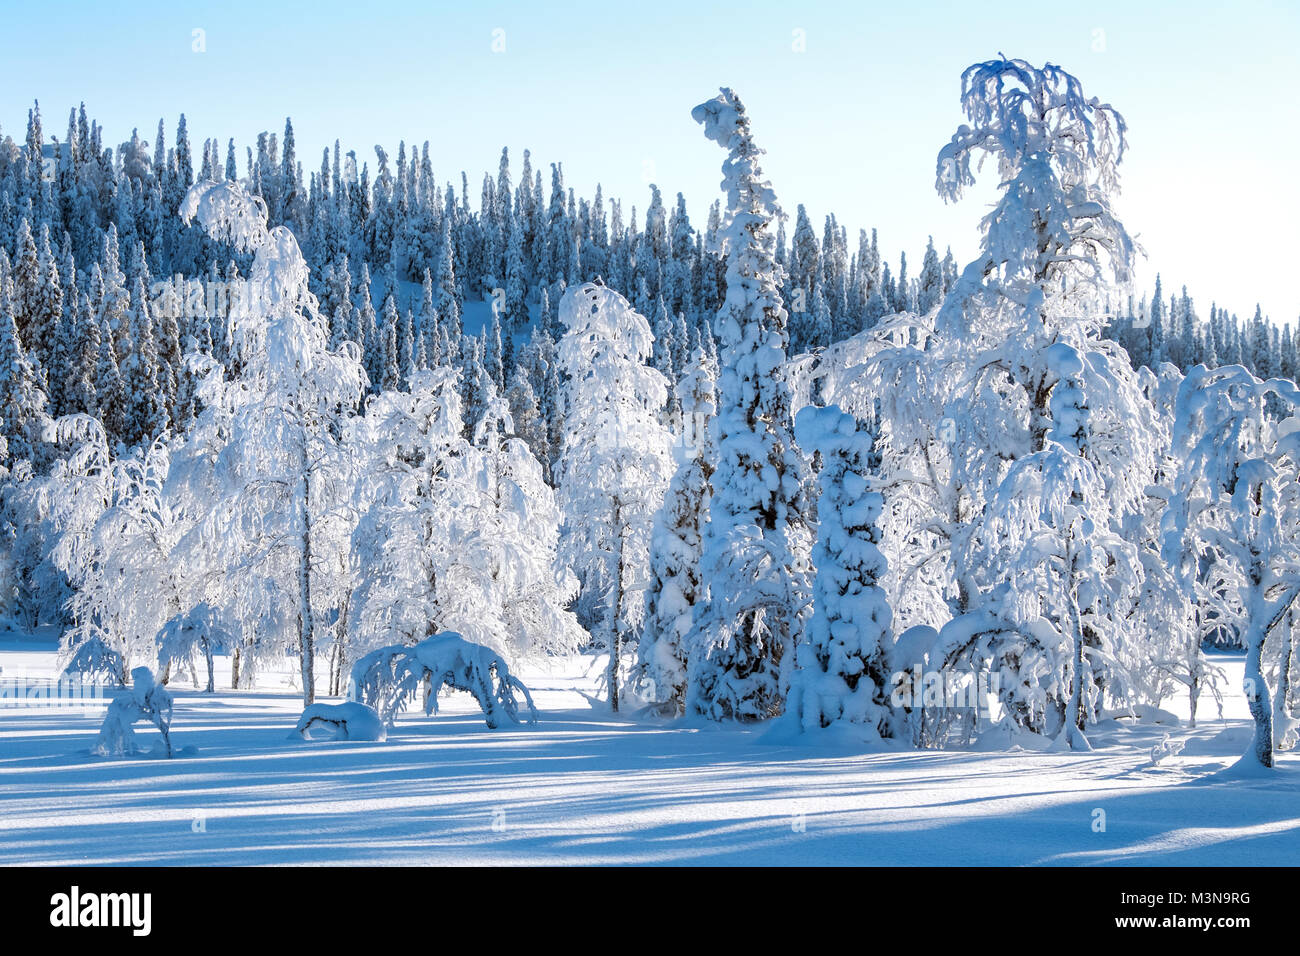 Snow-laden forests of northern Finland Stock Photo